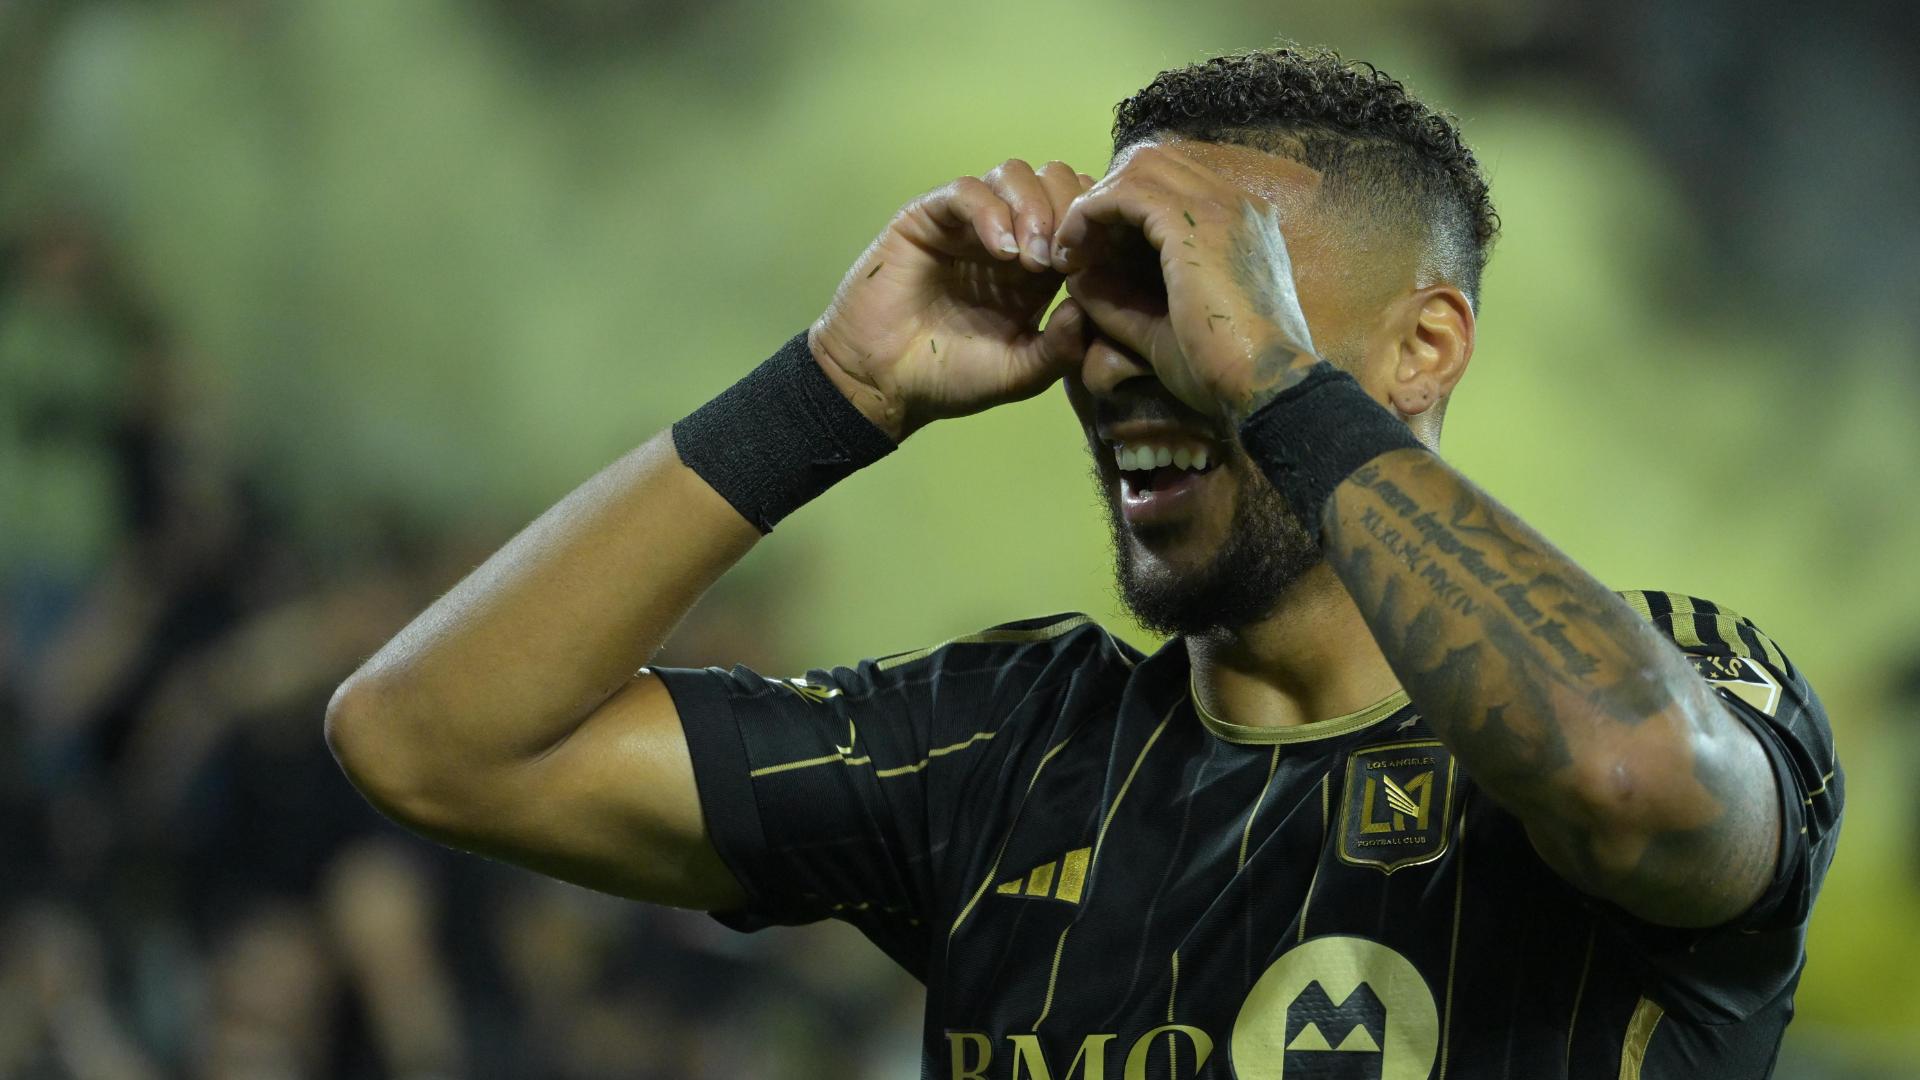 Denis Bouanga has 3rd assist of the game for LAFC